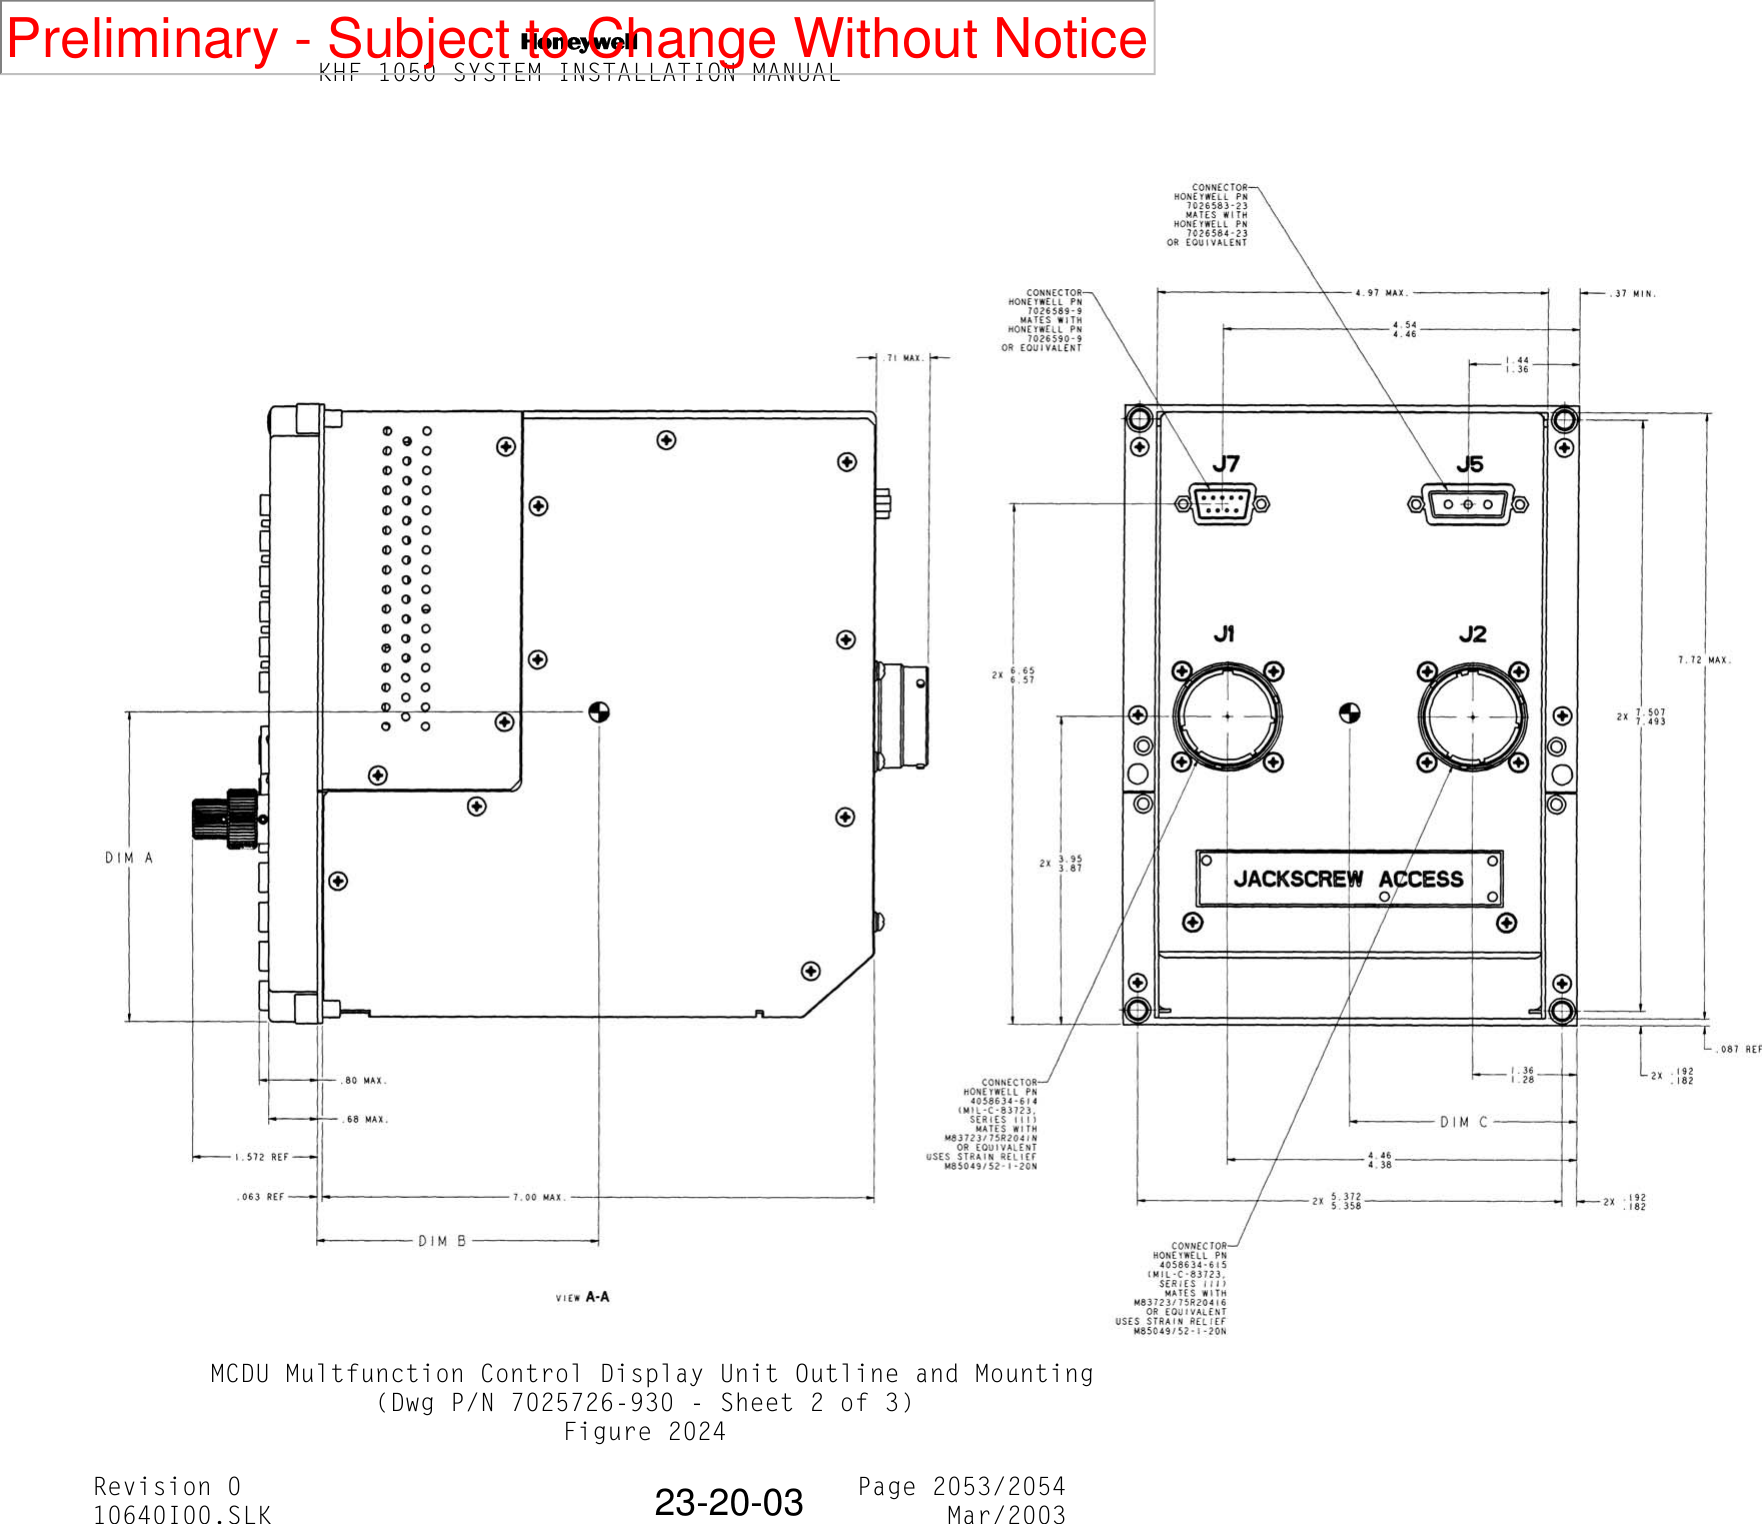 NKHF 1050 SYSTEM INSTALLATION MANUALRevision 0 Page 2053/205410640I00.SLK Mar/200323-20-03 MCDU Multfunction Control Display Unit Outline and Mounting(Dwg P/N 7025726-930 - Sheet 2 of 3)Figure 2024Preliminary - Subject to Change Without Notice